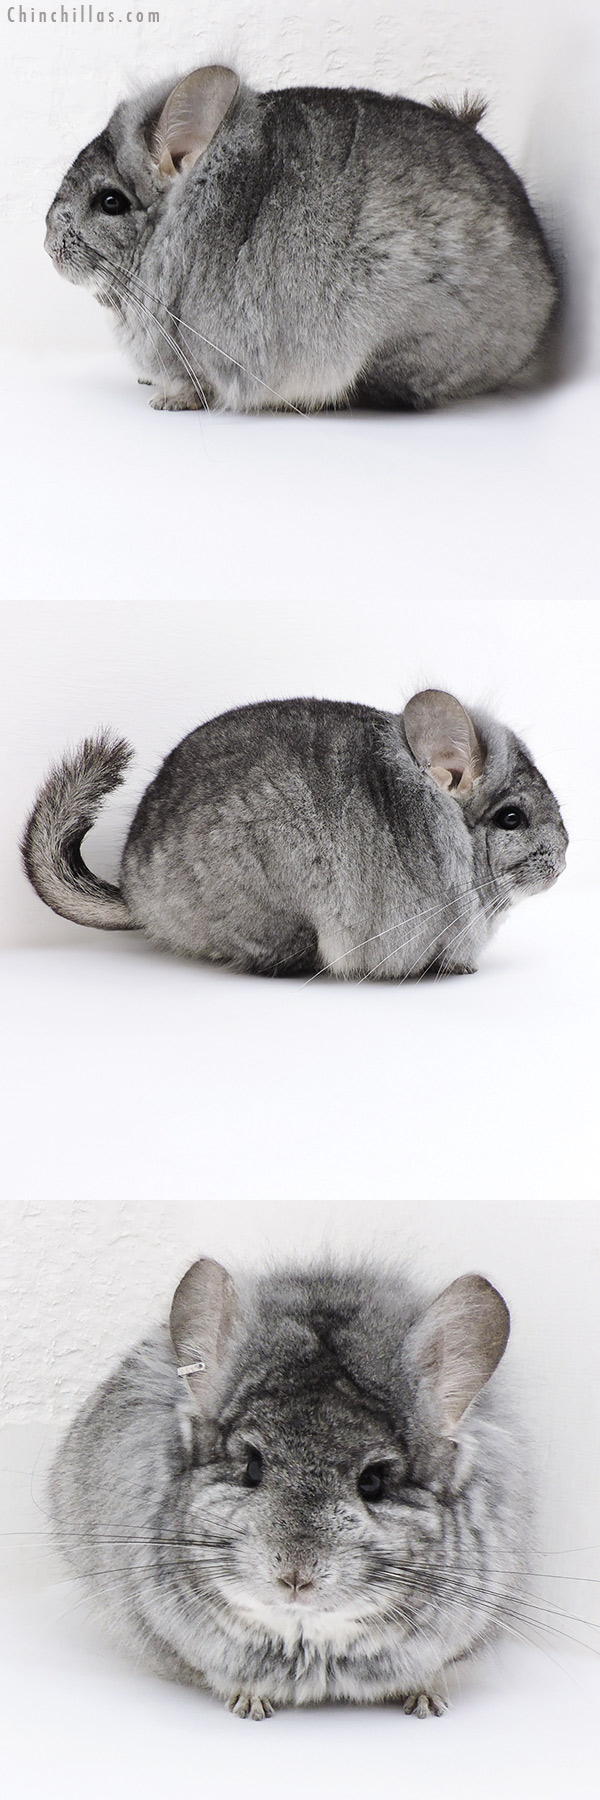 Chinchilla or related item offered for sale or export on Chinchillas.com - 17410 Exceptional Blocky Standard ( Sapphire Carrier )  Royal Persian Angora Male Chinchilla w/ Lion Mane